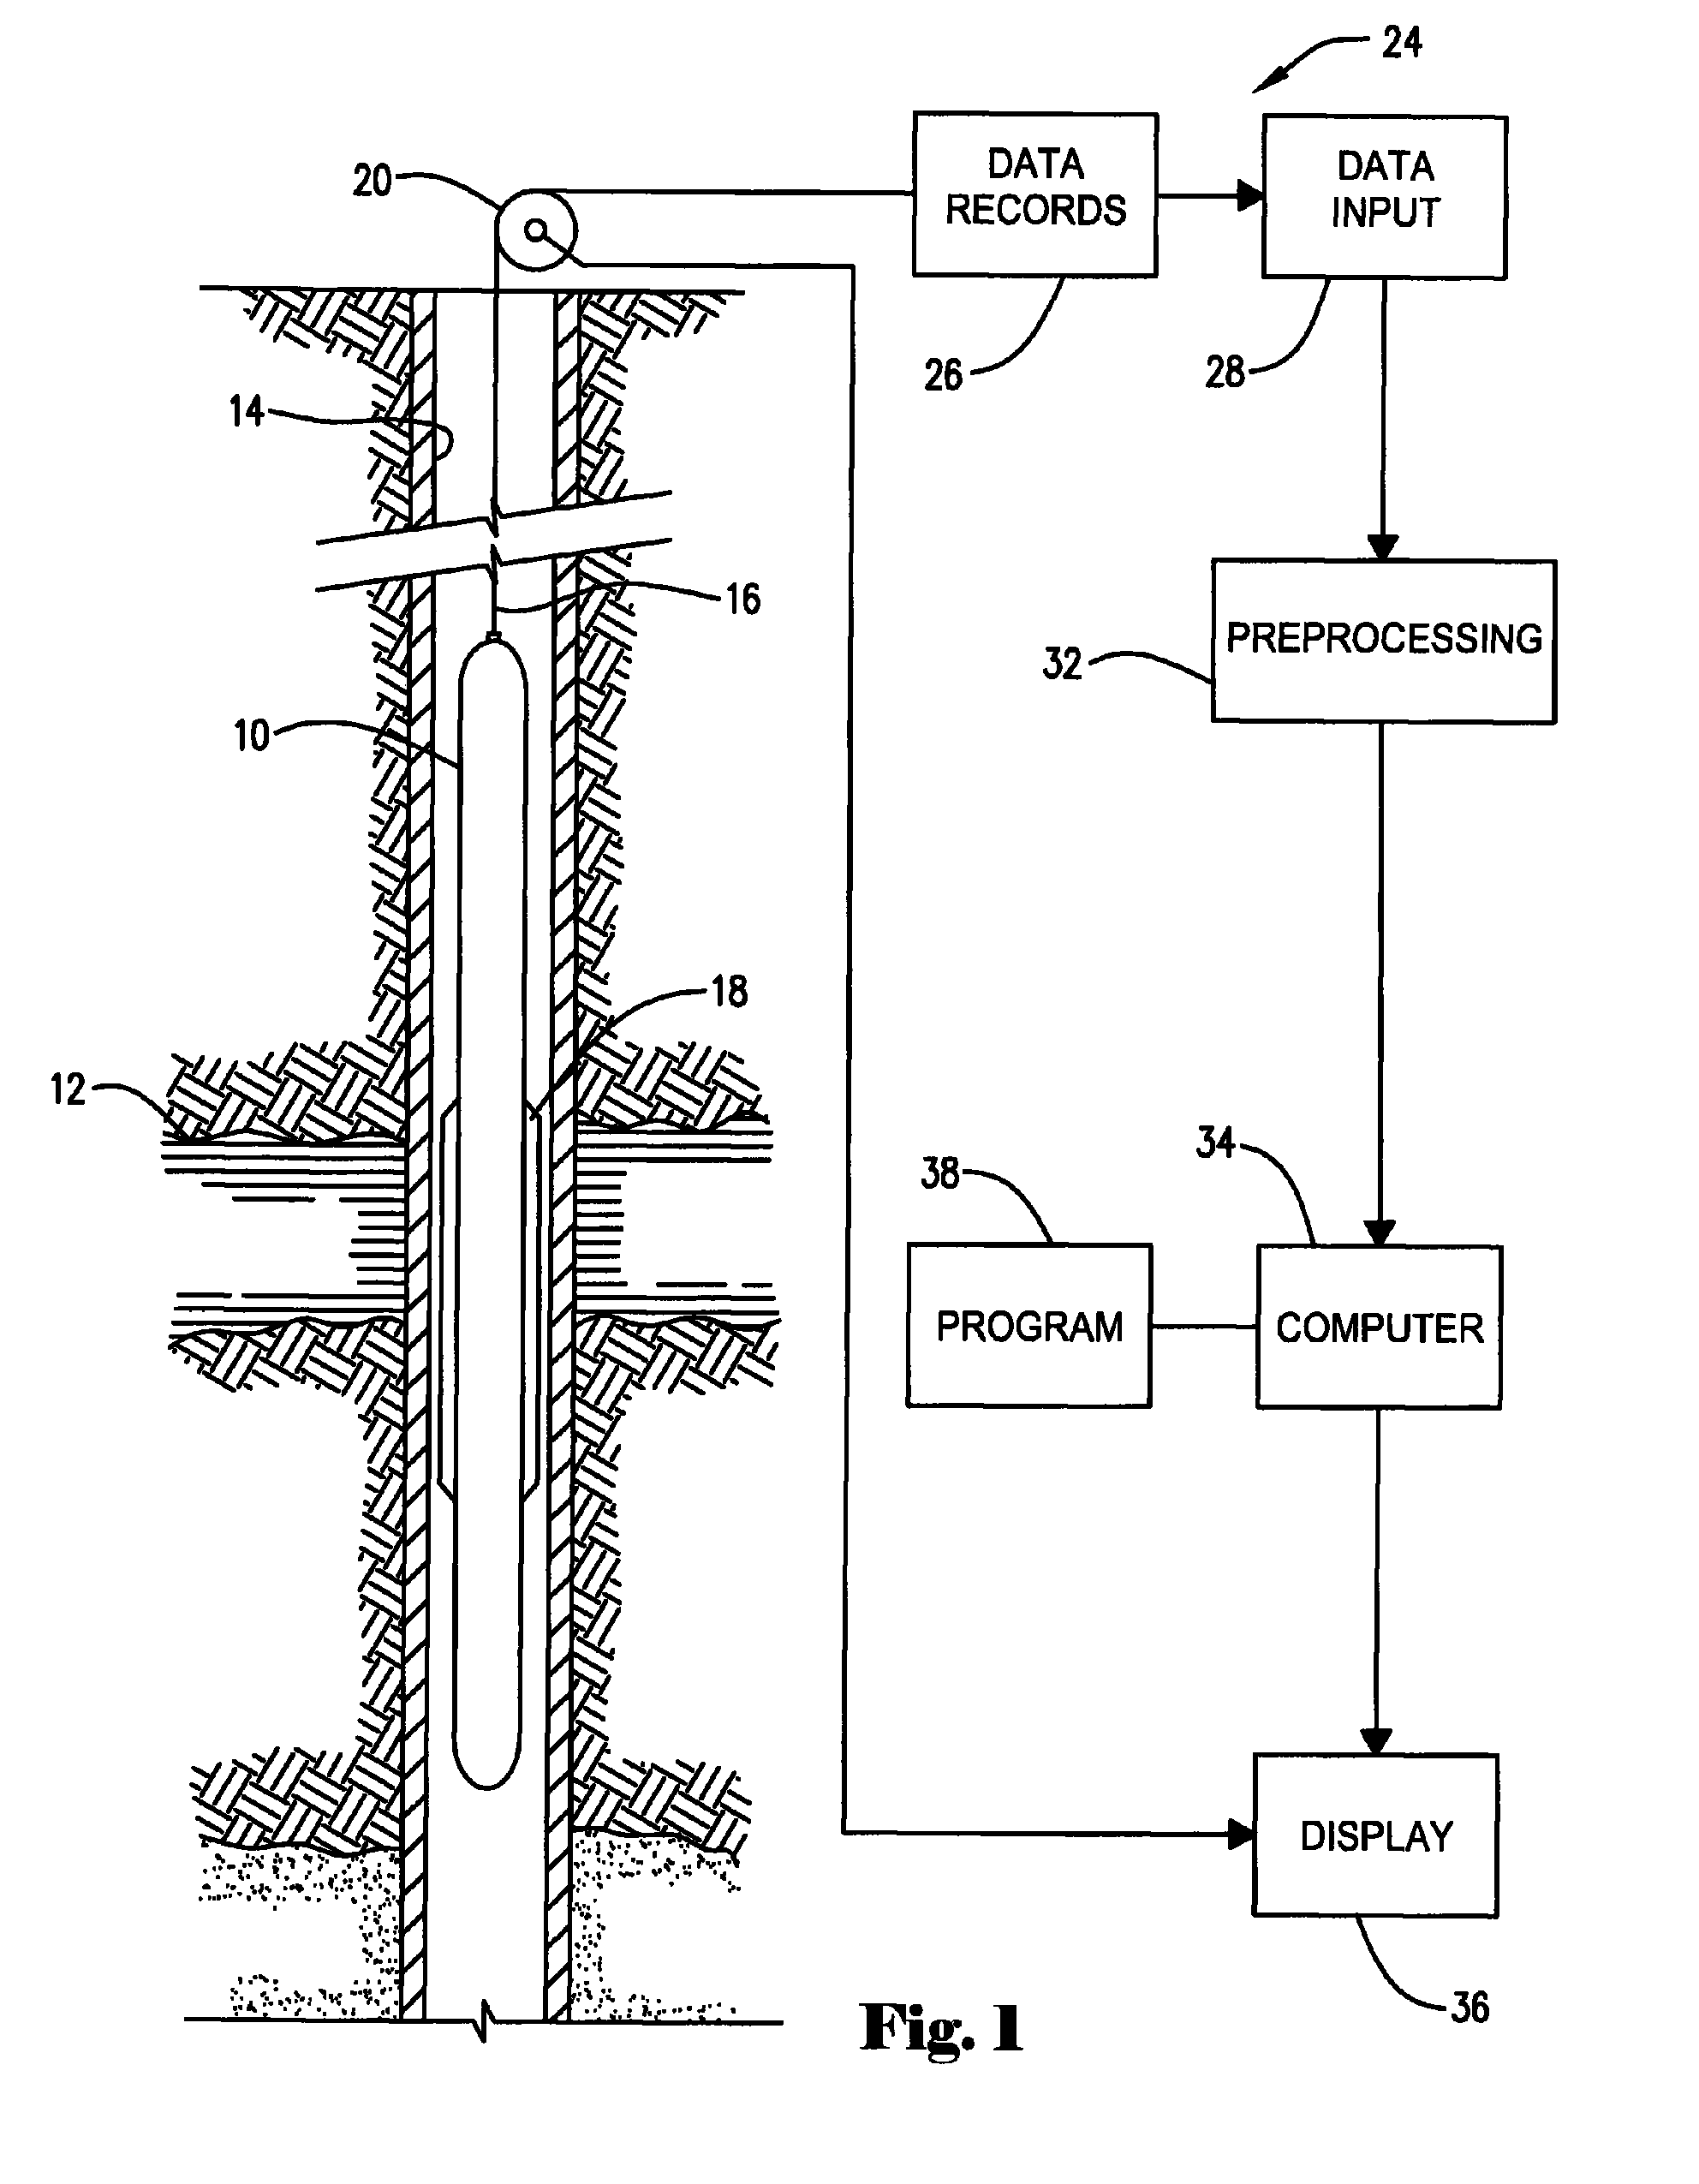 Method of predicting mechanical properties of rocks using mineral compositions provided by in-situ logging tools